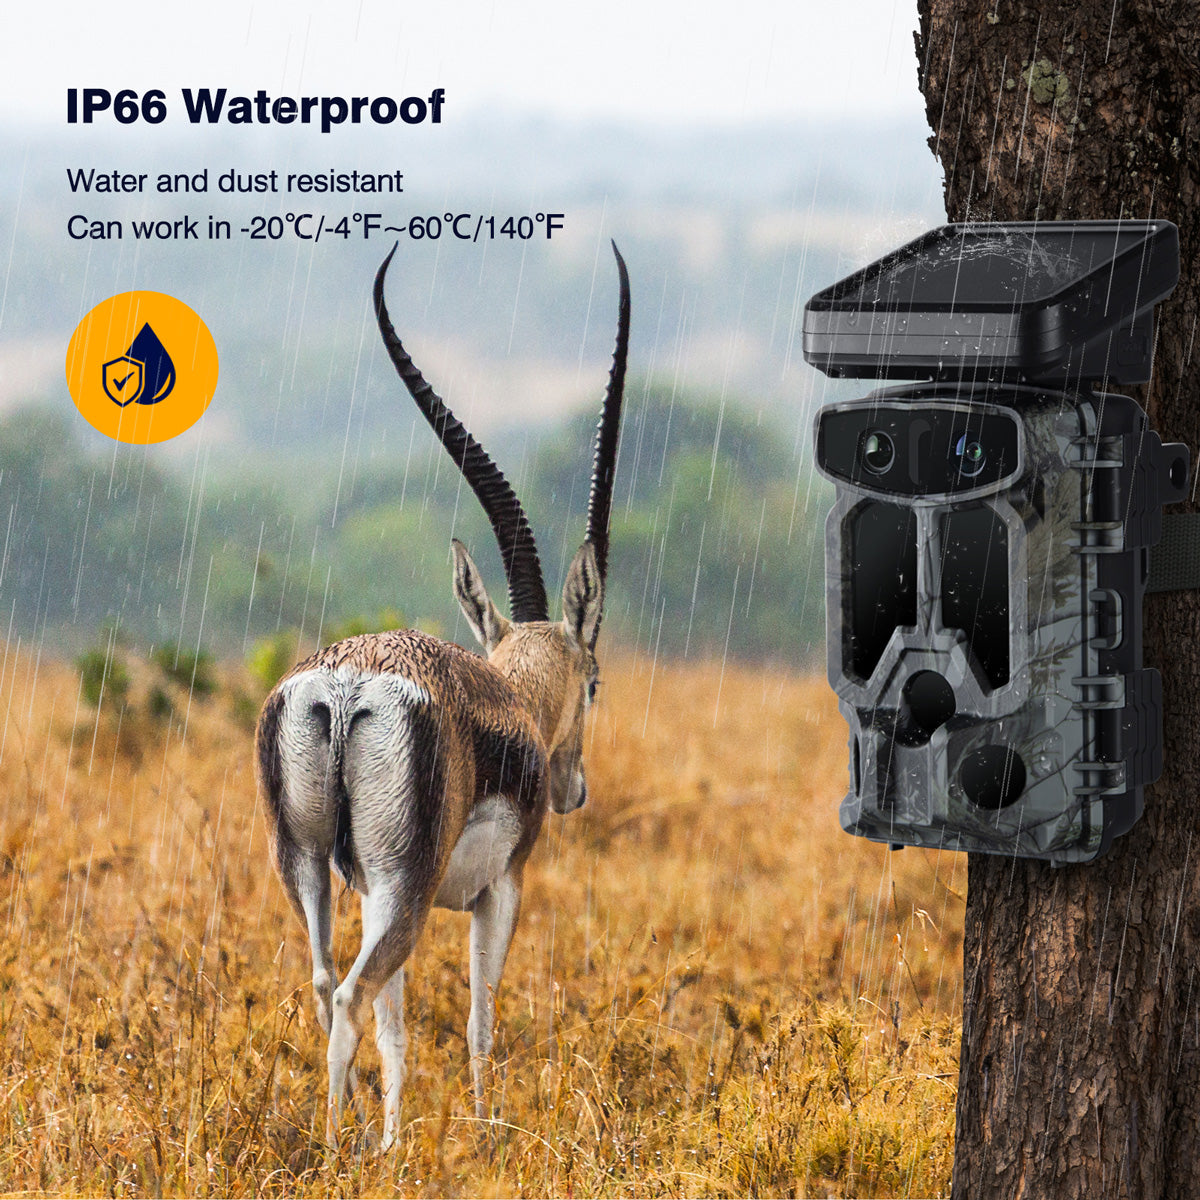 Campark TC07 4K 60MP WiFi Solar Power Dual Lens Wildlife Camera Trail Camera, The Highest-Definition & Performance Game Cam (Out Of Stock In Canada)